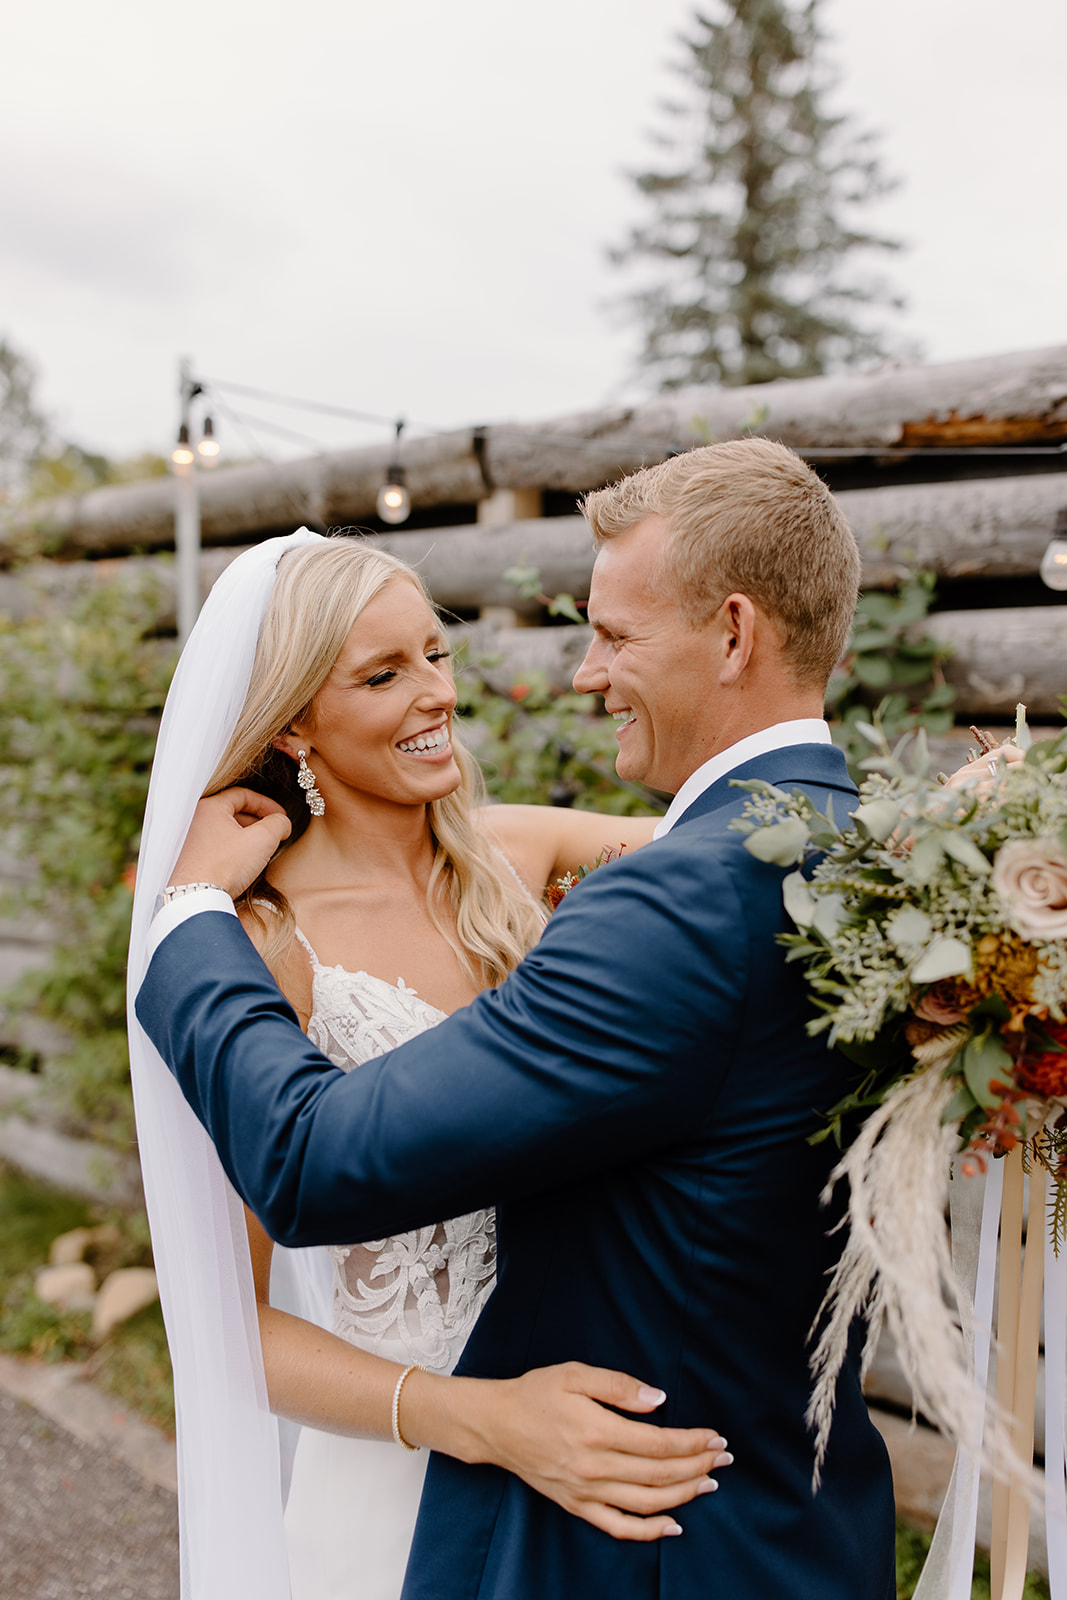 Groom fixes his bride's hair while she smiles at him